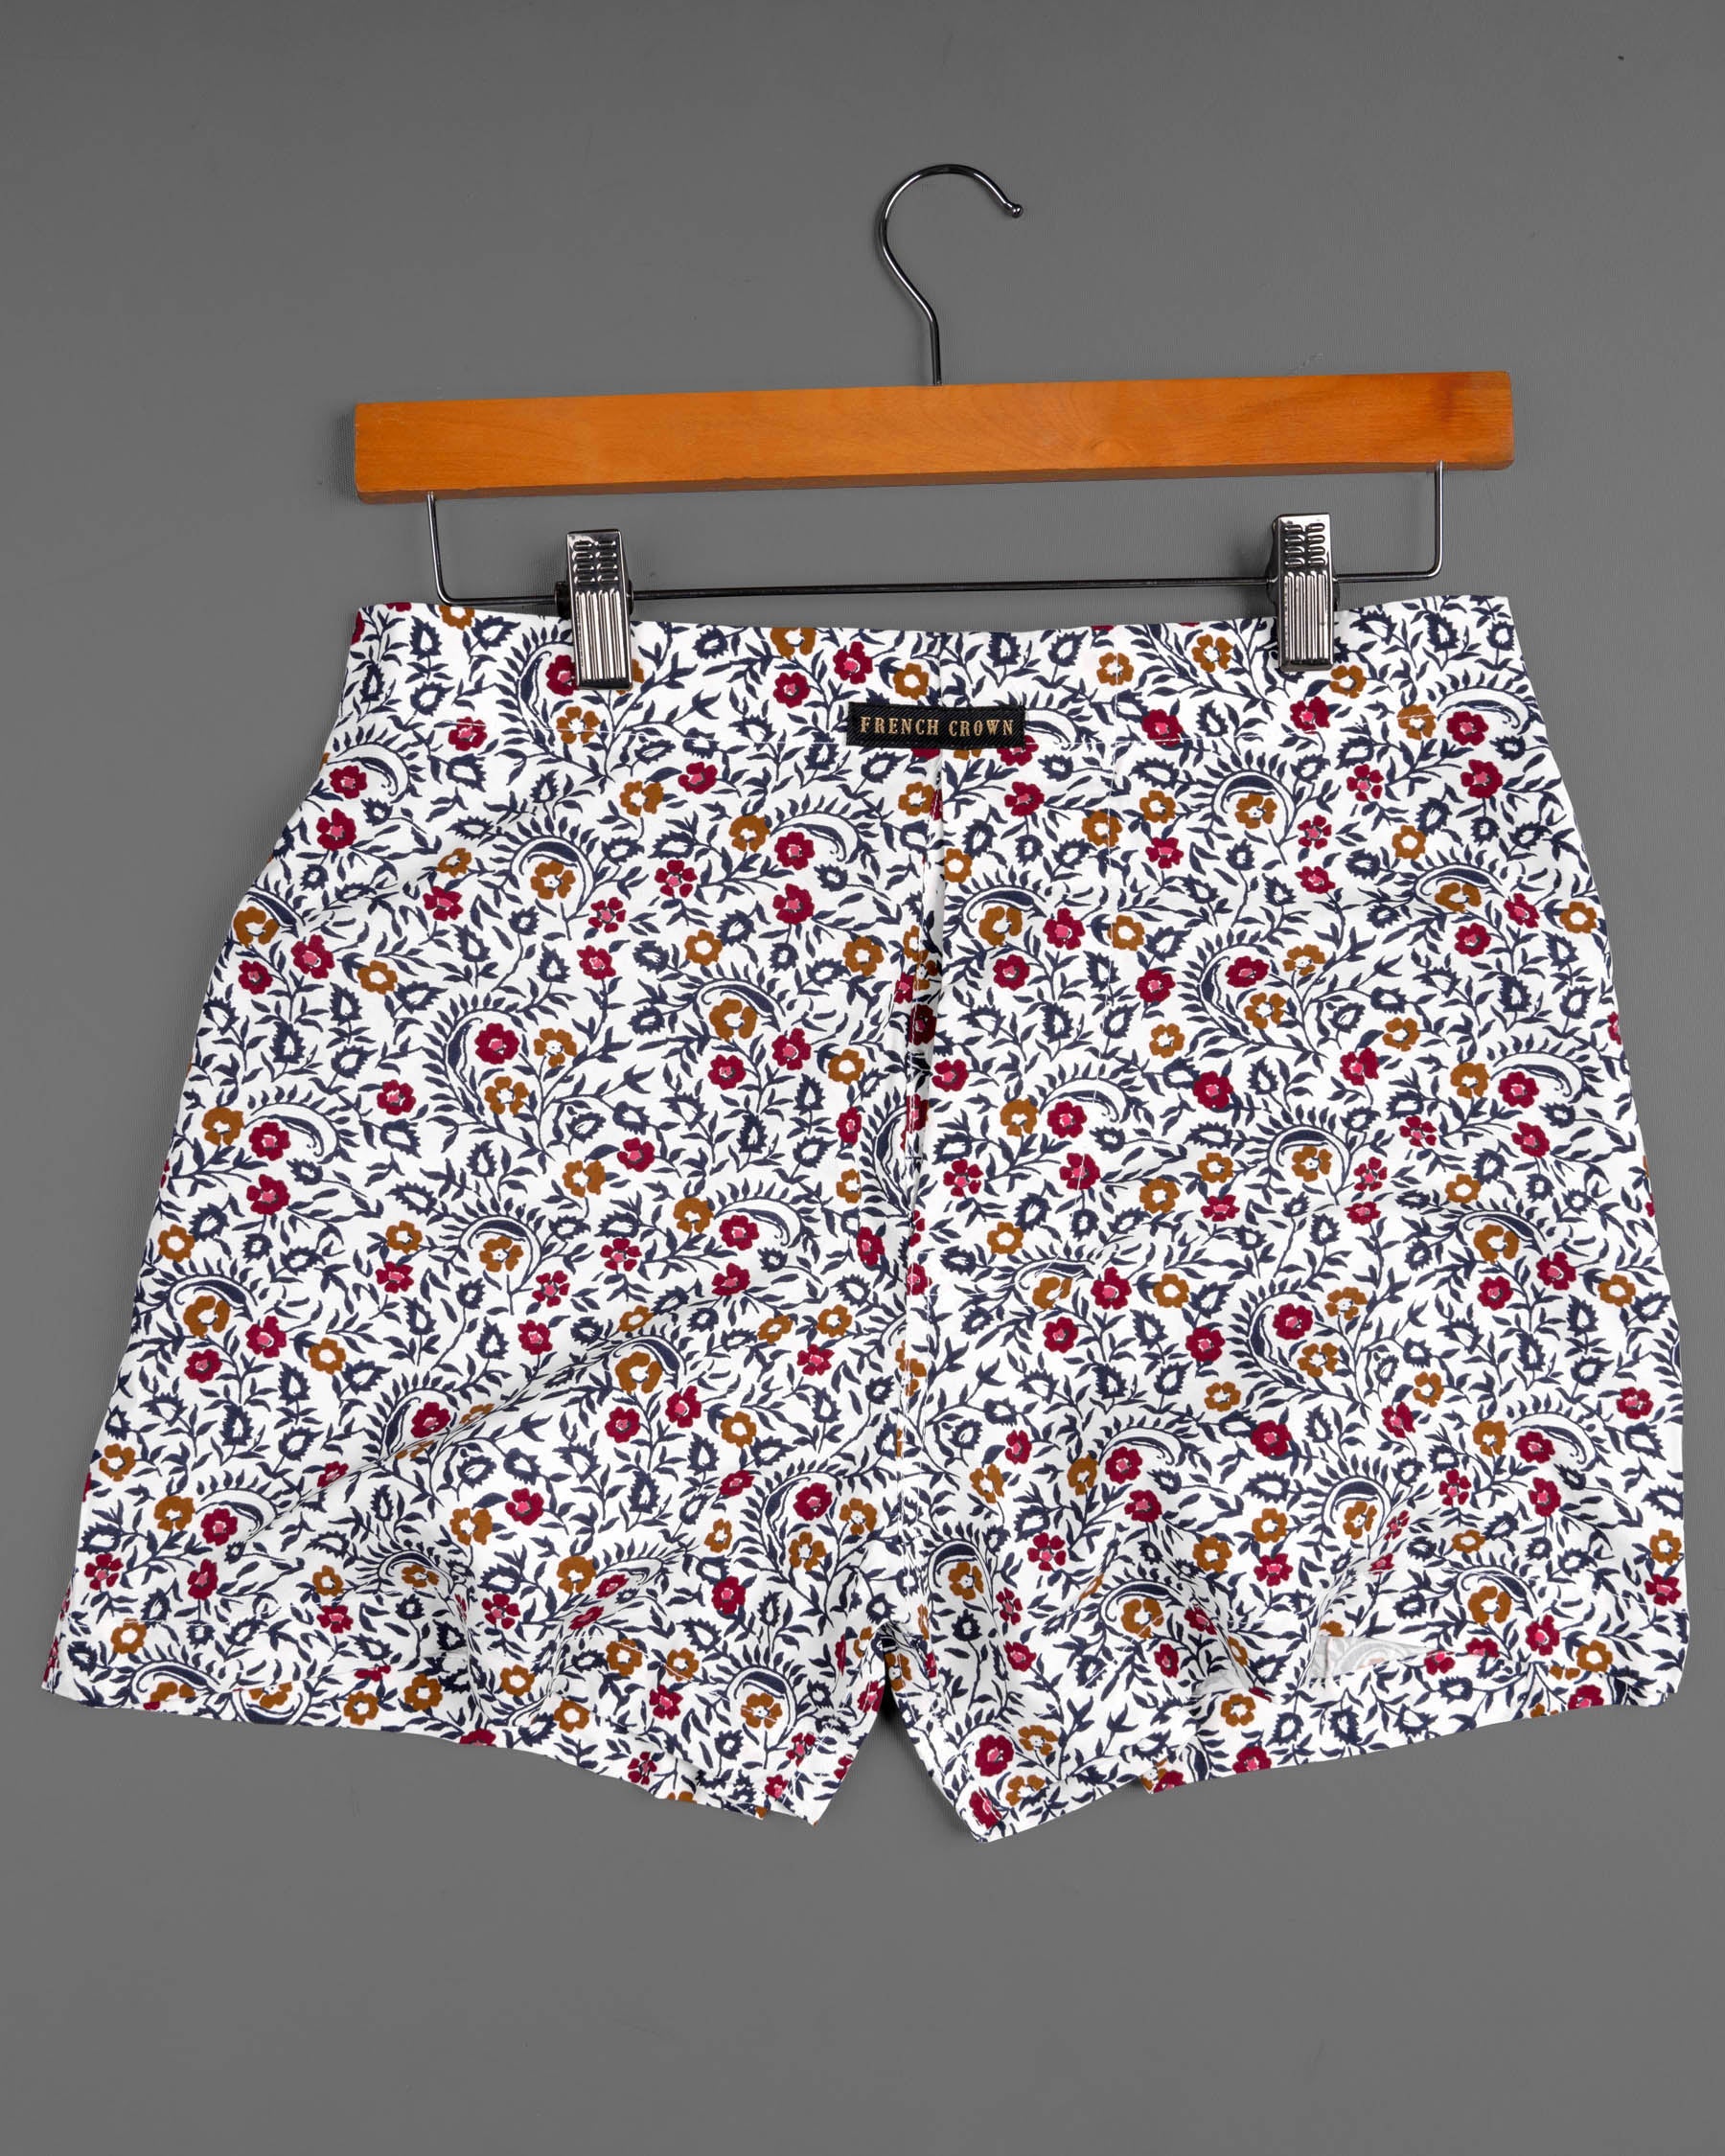 Bright White and Tamarillo Red with Camouflage Green Premium Tencel Boxers BX422-02-28, BX422-02-30, BX422-02-32, BX422-02-34, BX422-02-36, BX422-02-38, BX422-02-40, BX422-02-42, BX422-02-44